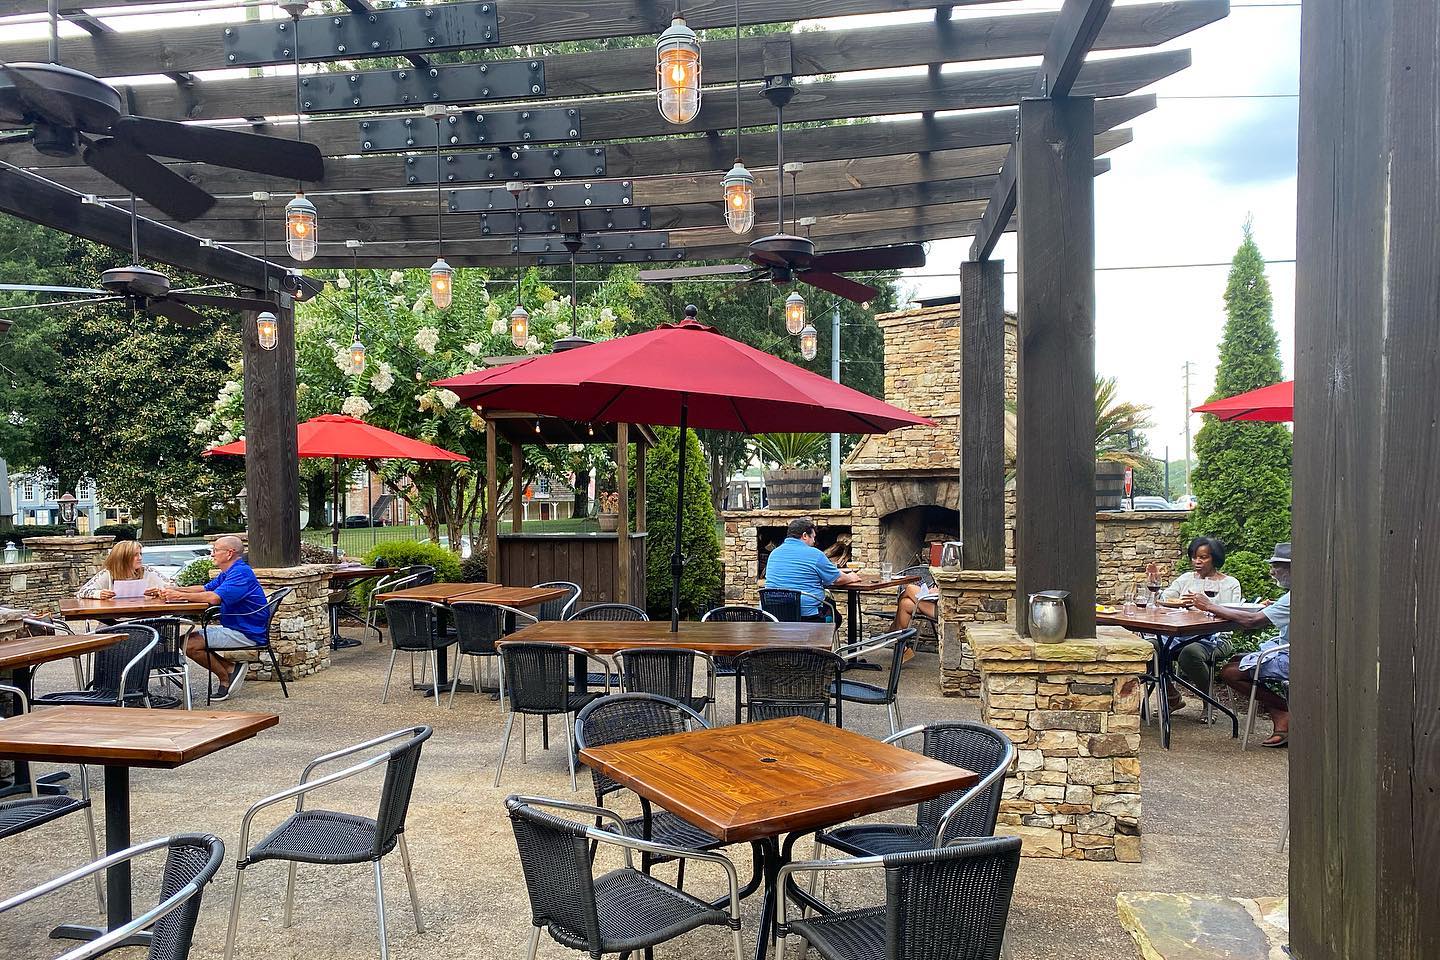 downtown lawrenceville restaurants with outdoor seating